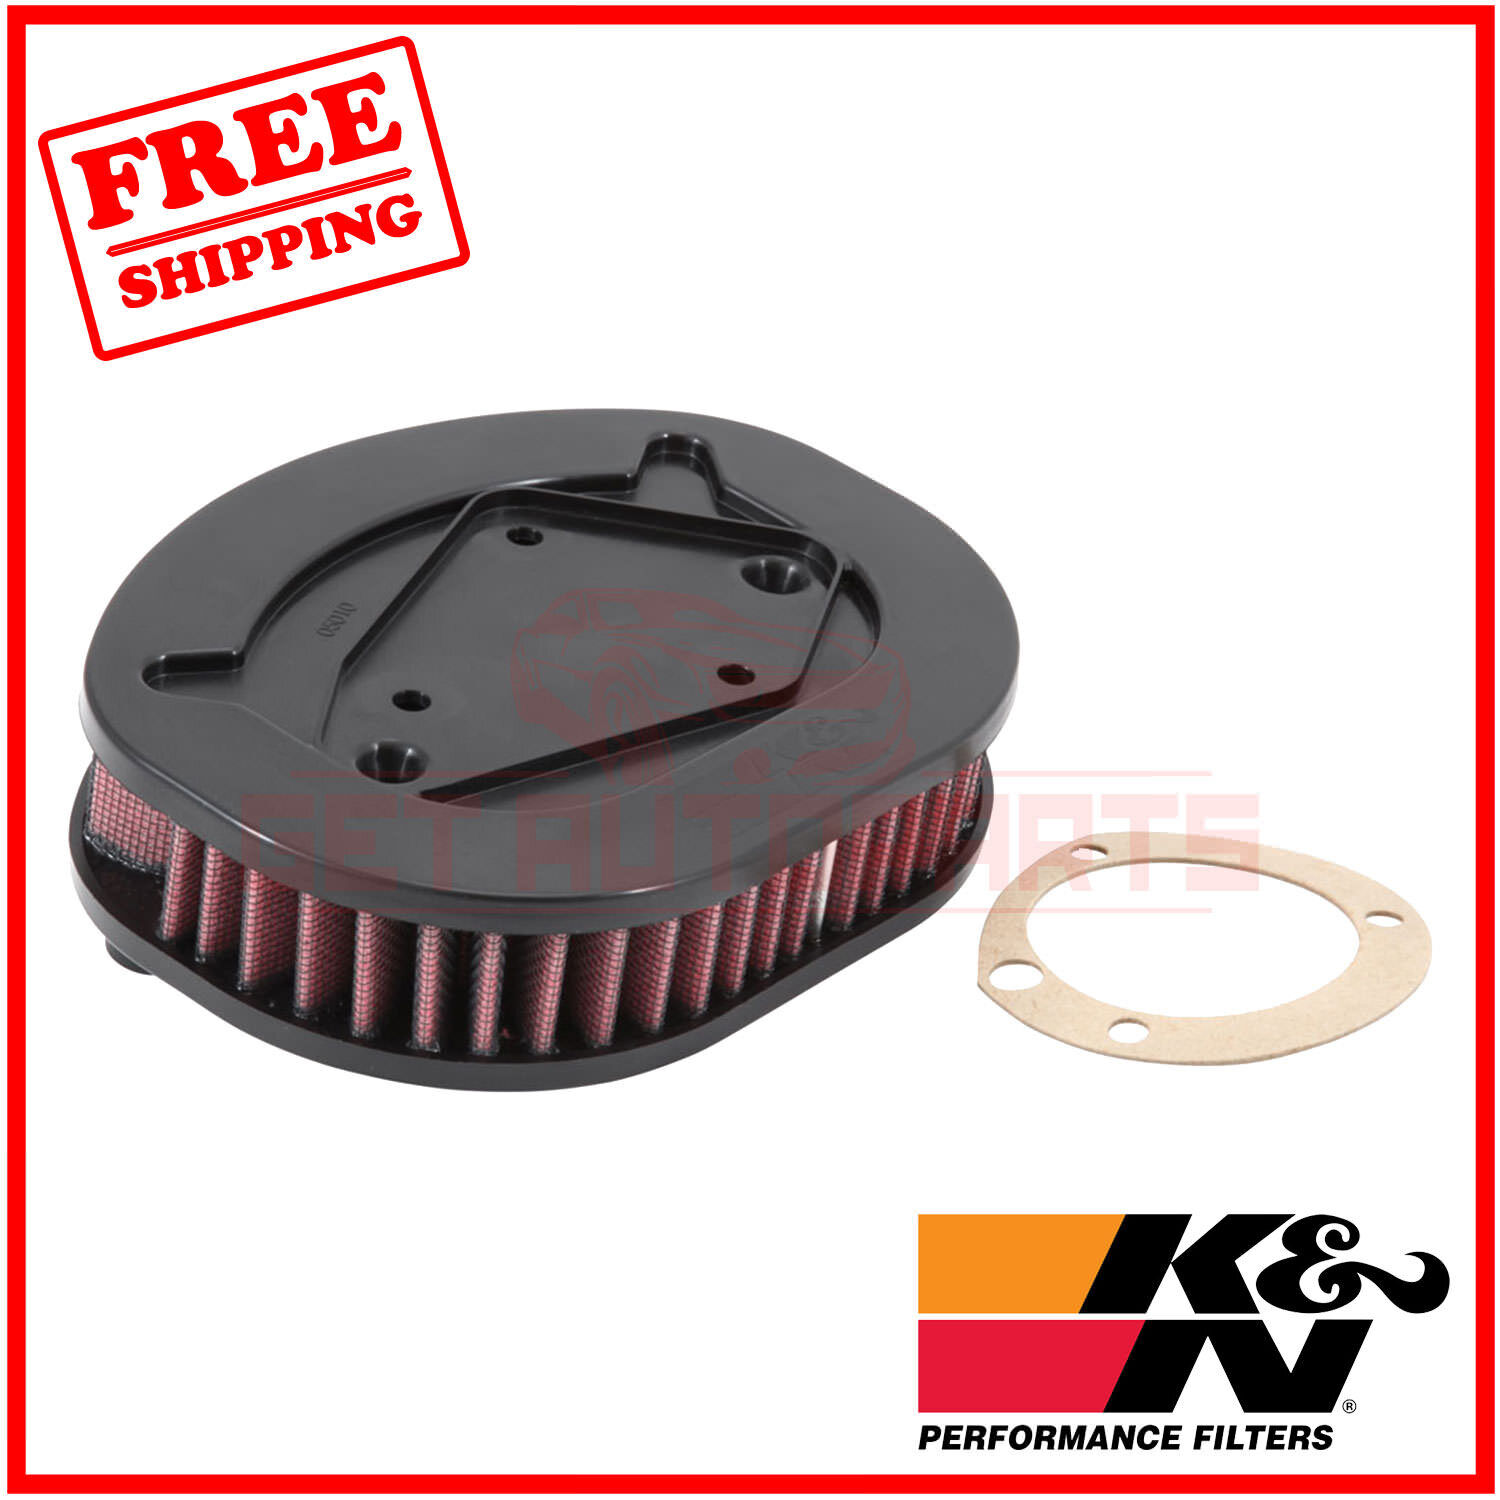 K&N Replacement Air Filter for Harley Davidson XL1200C Sportster 1200 2014-2019